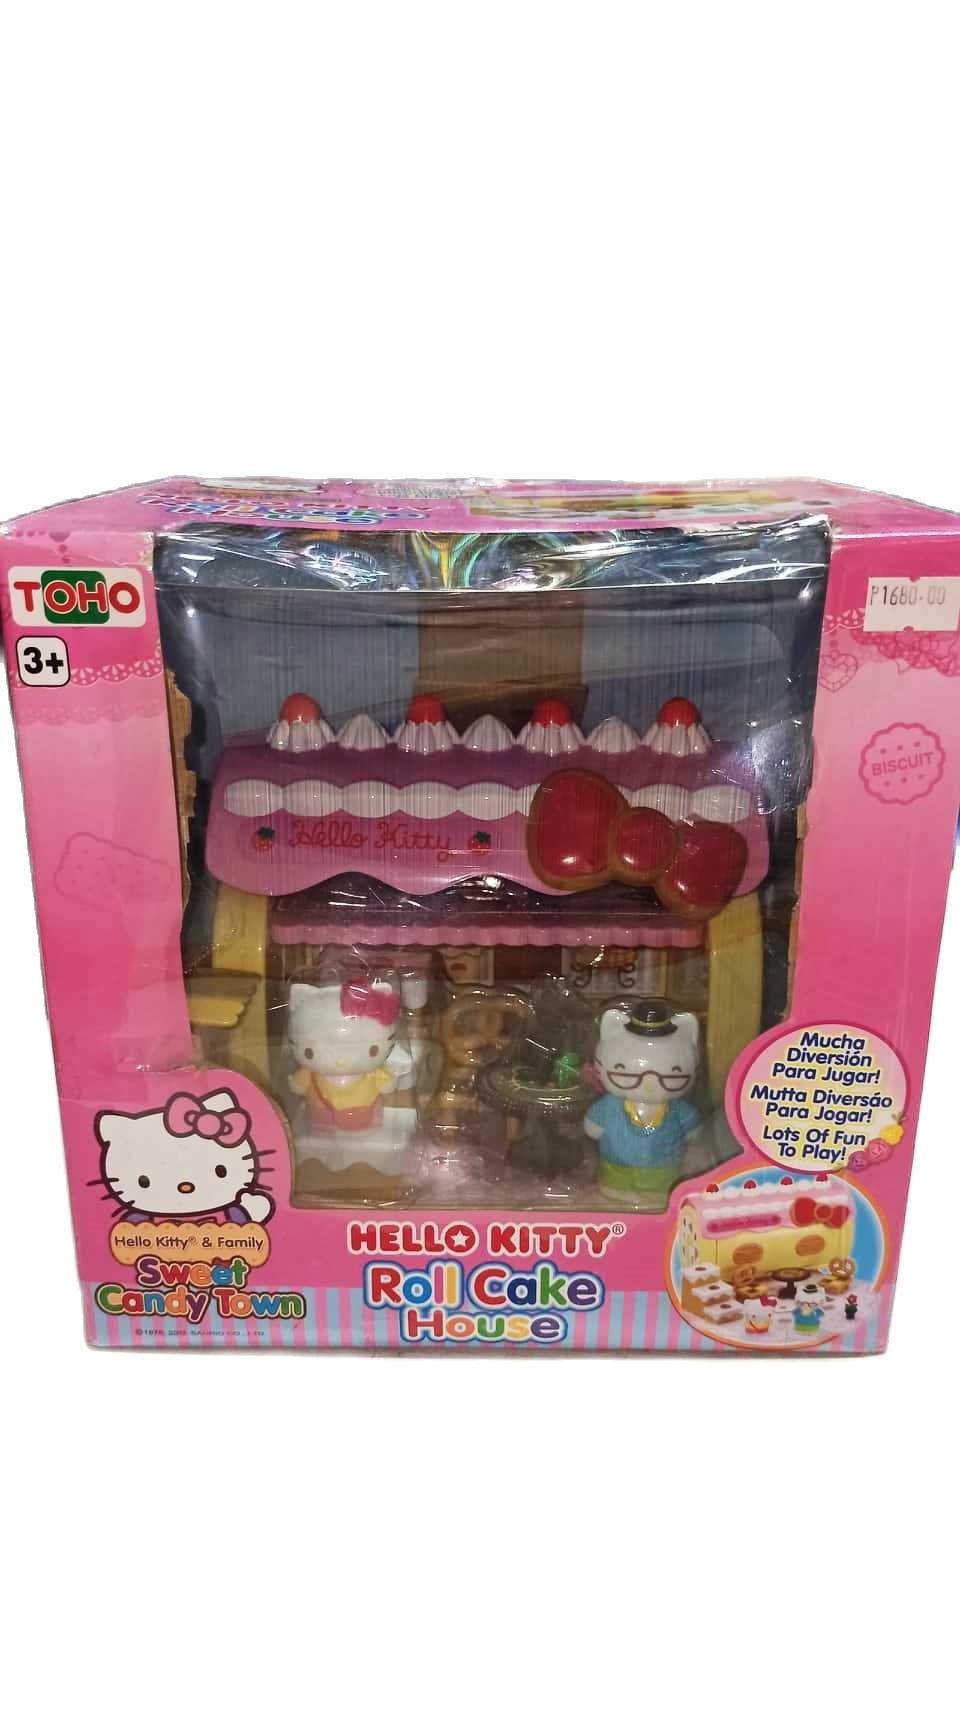 Hello Kitty Sweets Cafe Vol.2 Strawberry Roll Cake limited… | Flickr